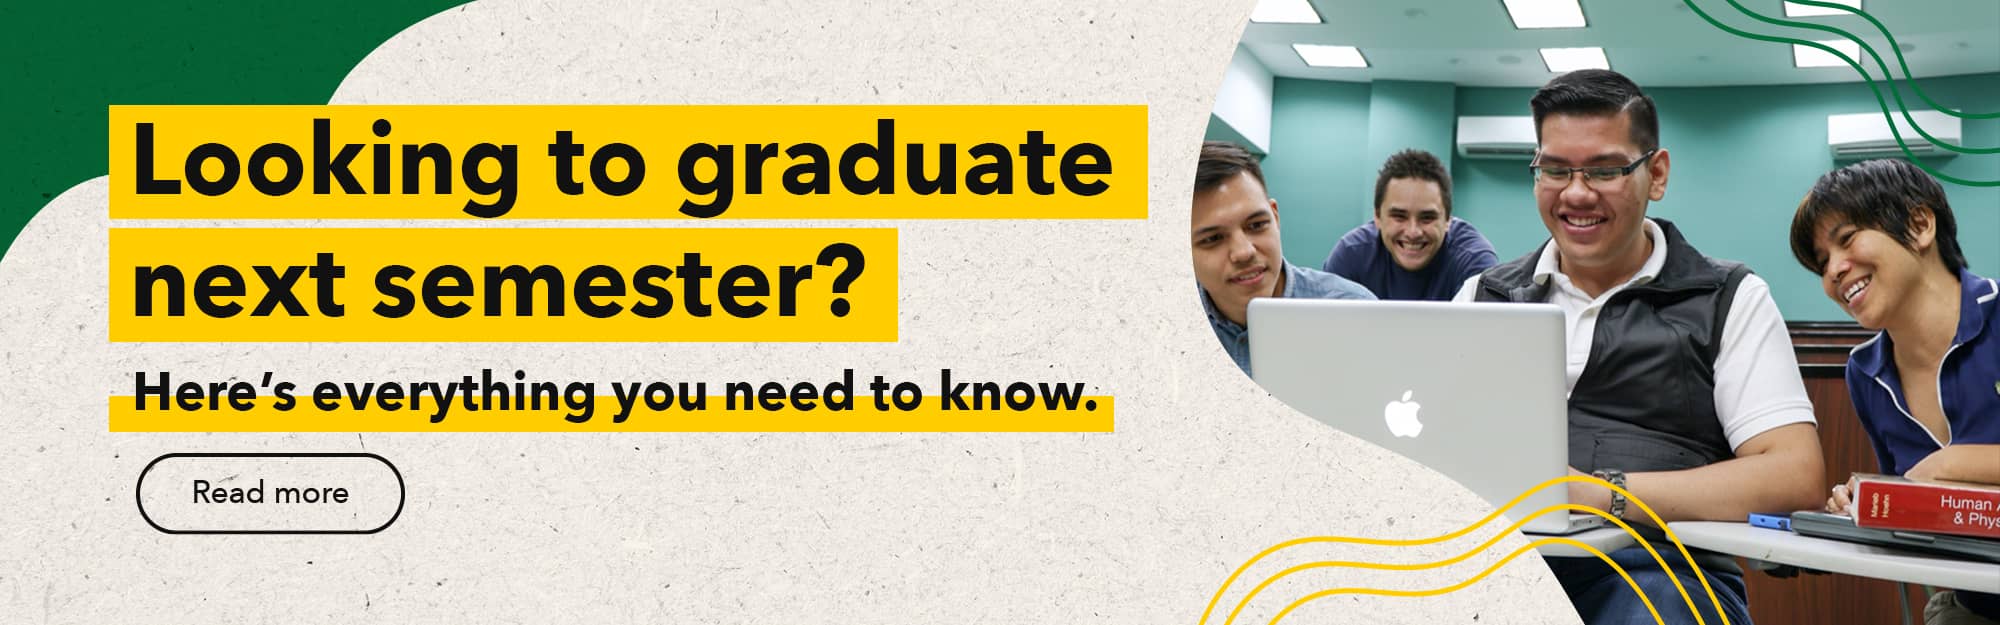 Looking to graduate next semester? Here's everything you need to know.